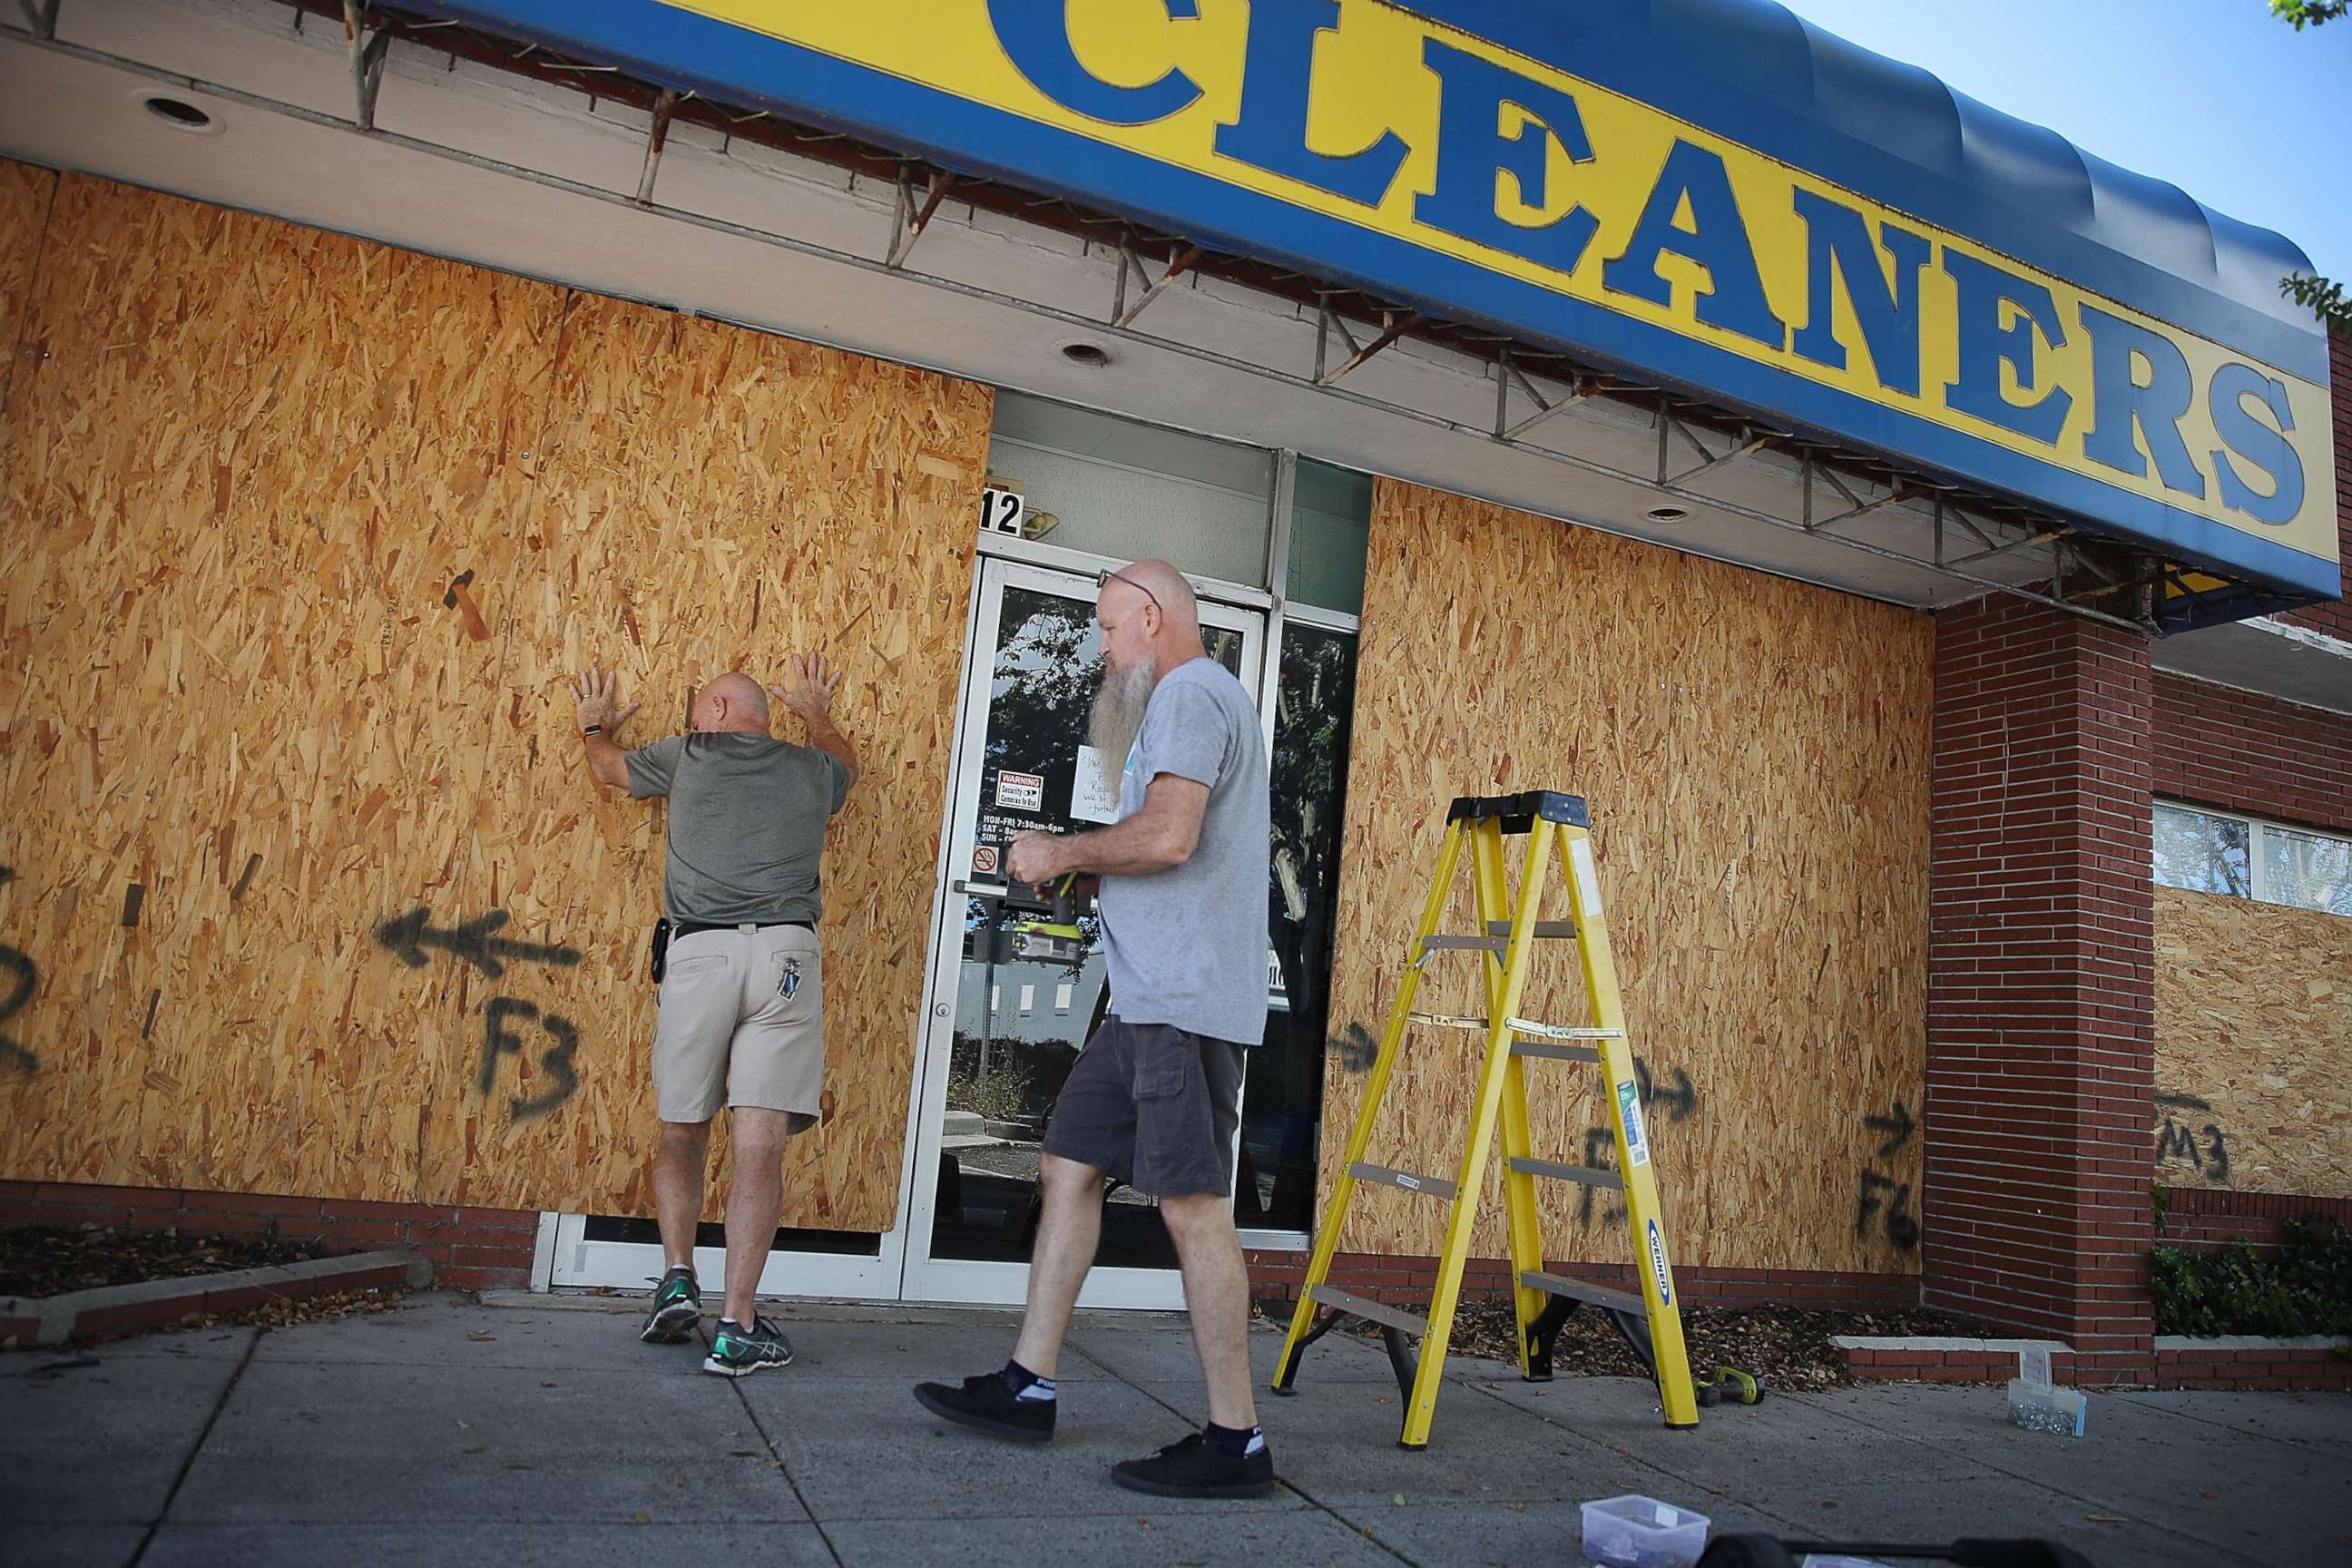 PHOTO: Michael Schwartz (L) and Jay Schwartz secure plywood over the windows of their business ahead of the arrival of Hurricane Florence, Sept. 11, 2018, in Myrtle Beach, S.C.